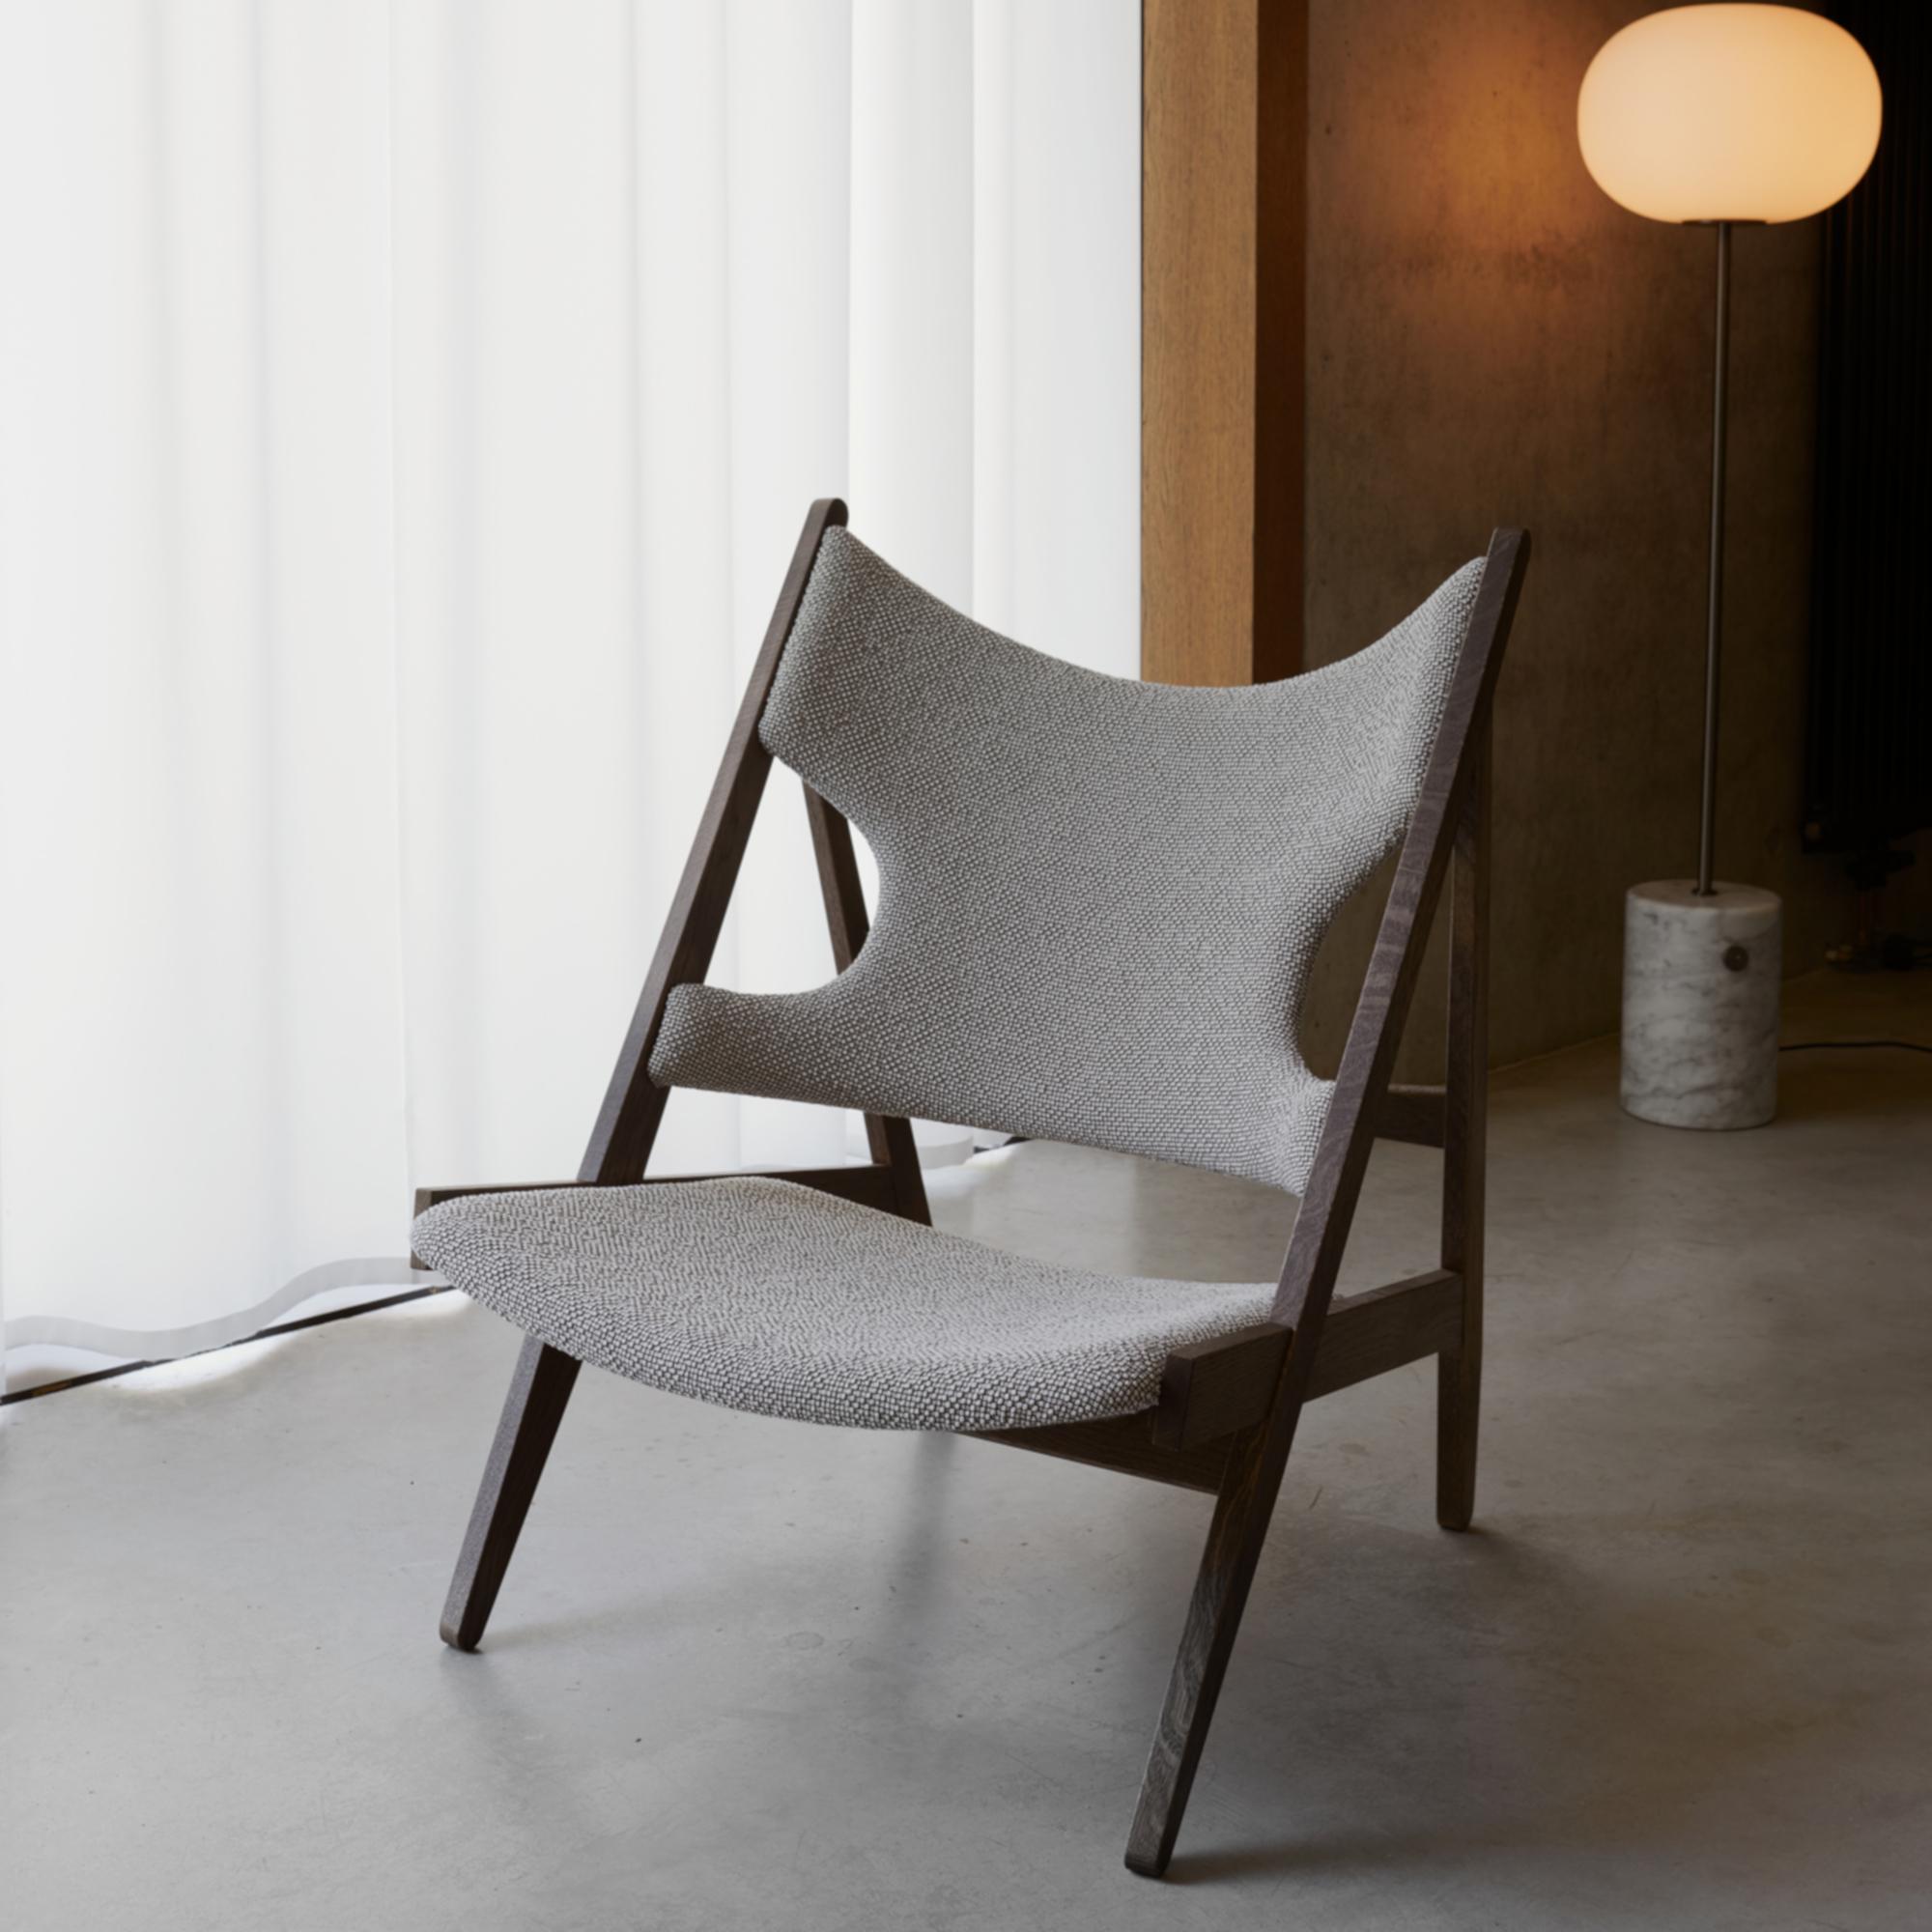 Defined by an exposed, triangular construction, a gently curved seat and back ideally pitched for relaxation, and distinctive cut-outs for resting the elbows when reading (or, of course, knitting), the knitting chair affirmed Kofod-Larsen’s